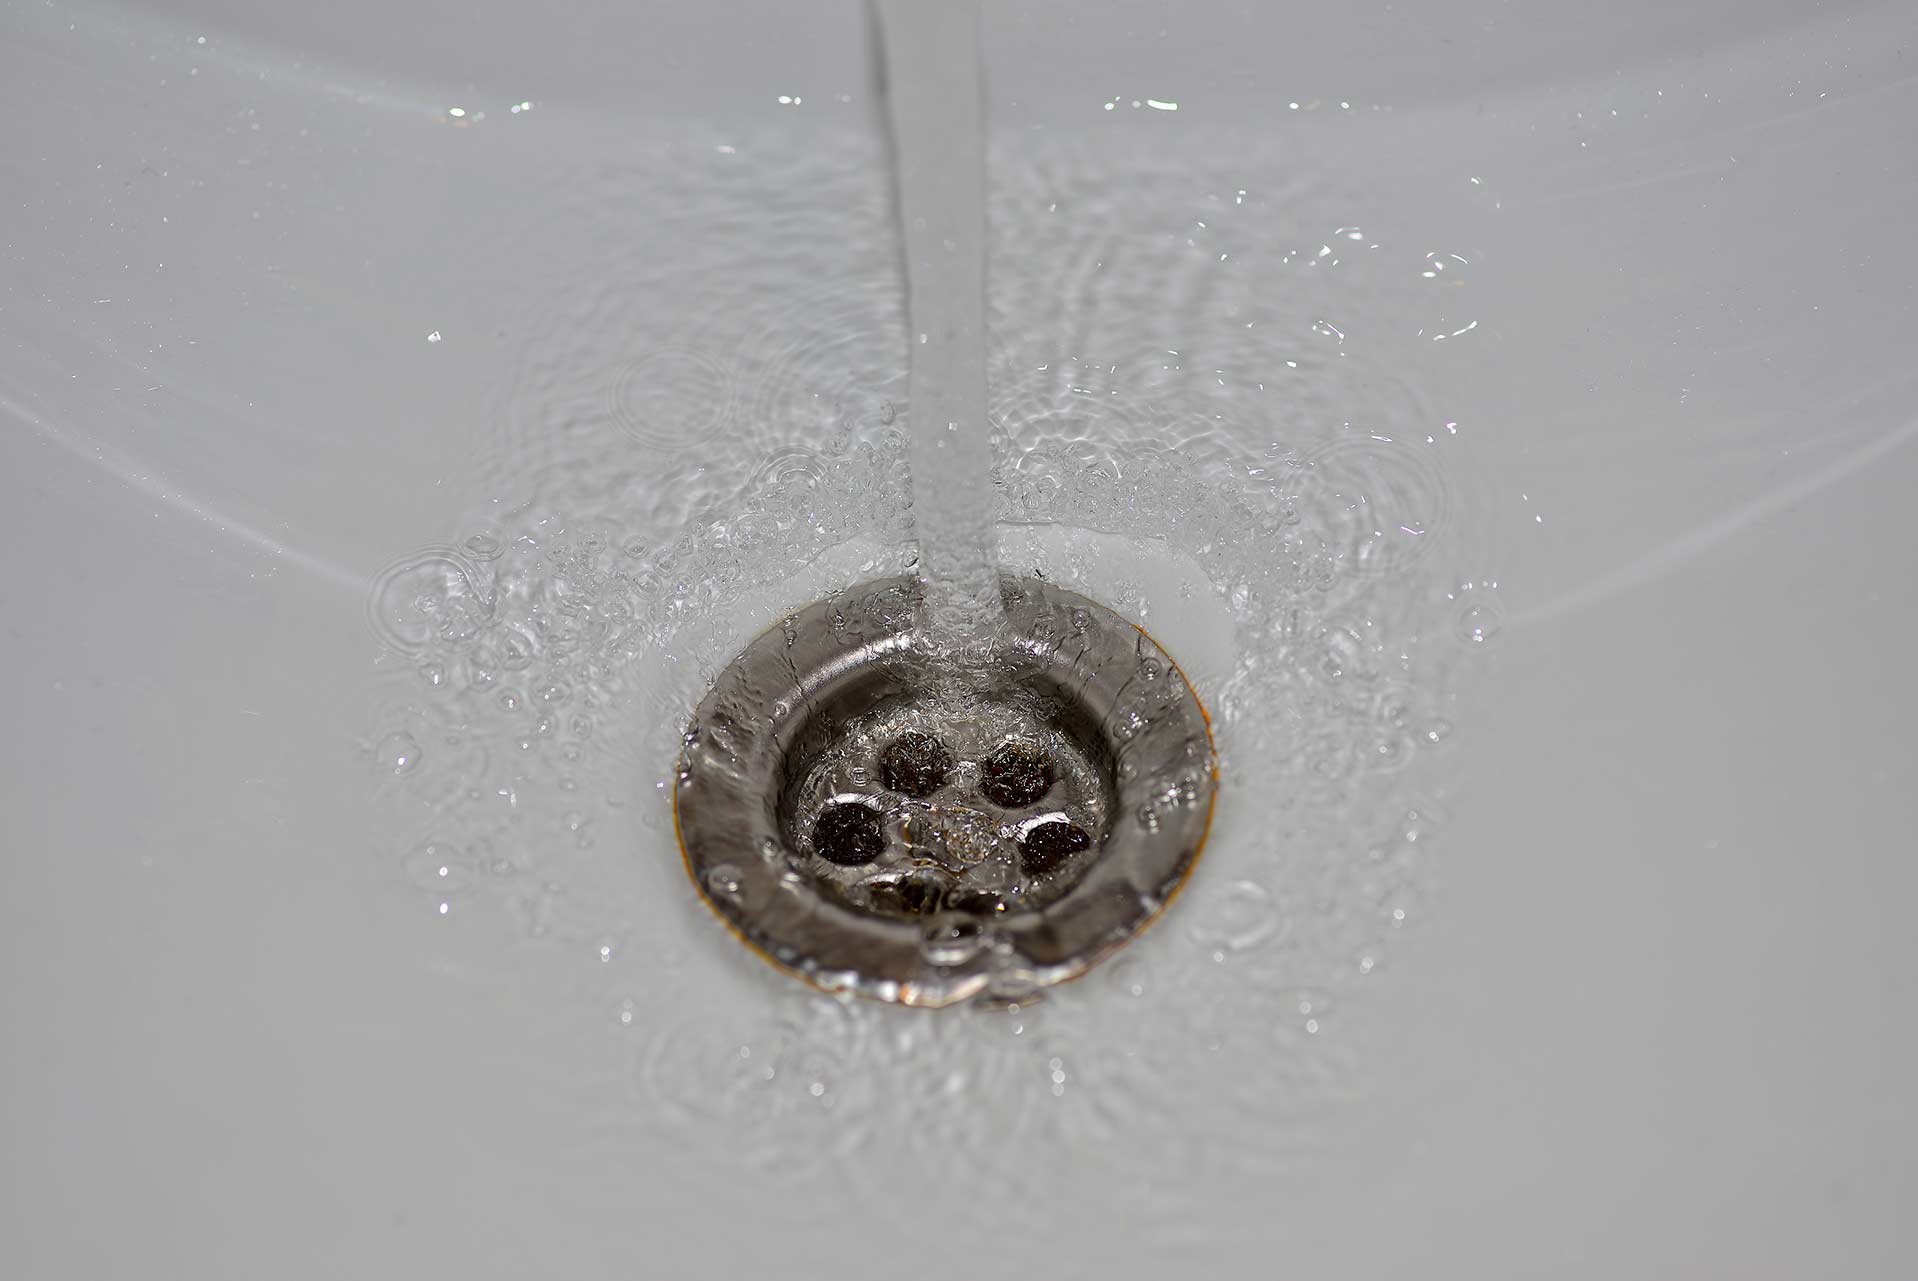 A2B Drains provides services to unblock blocked sinks and drains for properties in Broxbourne.